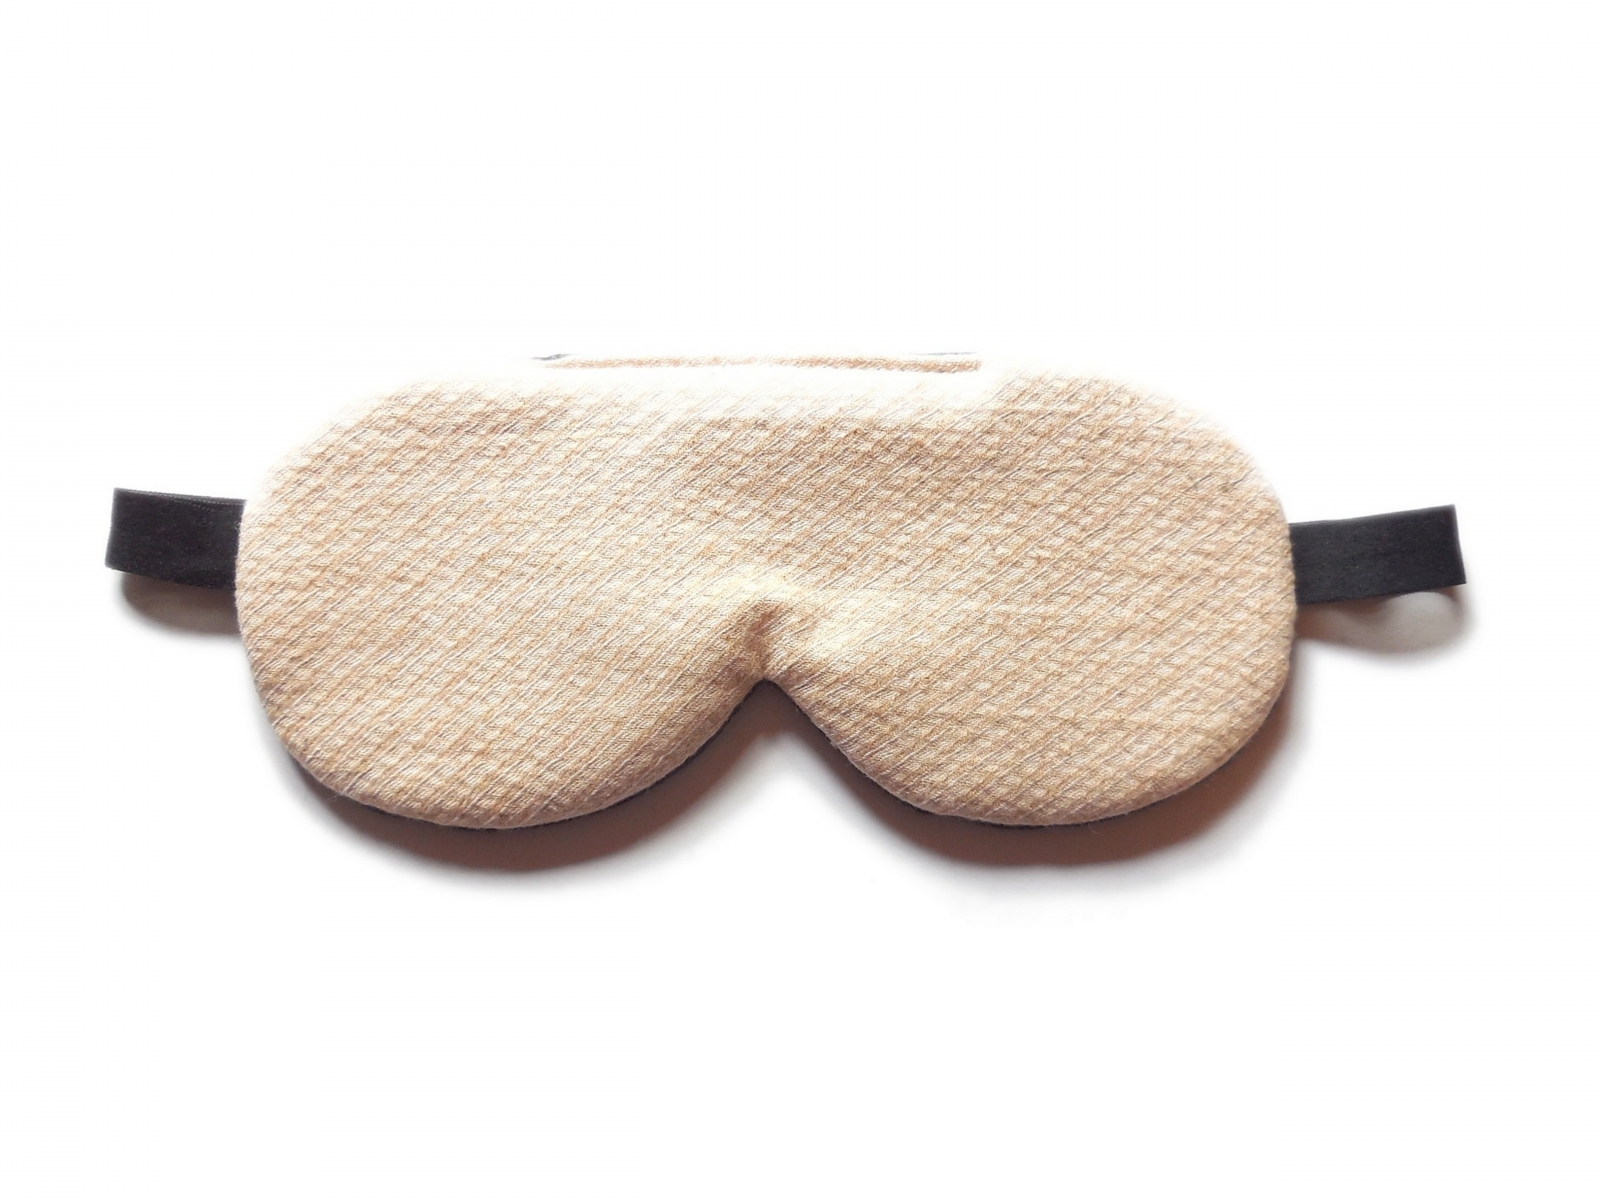 Eye Shade Made with Organic Cotton - Adjustable Elastic Strap